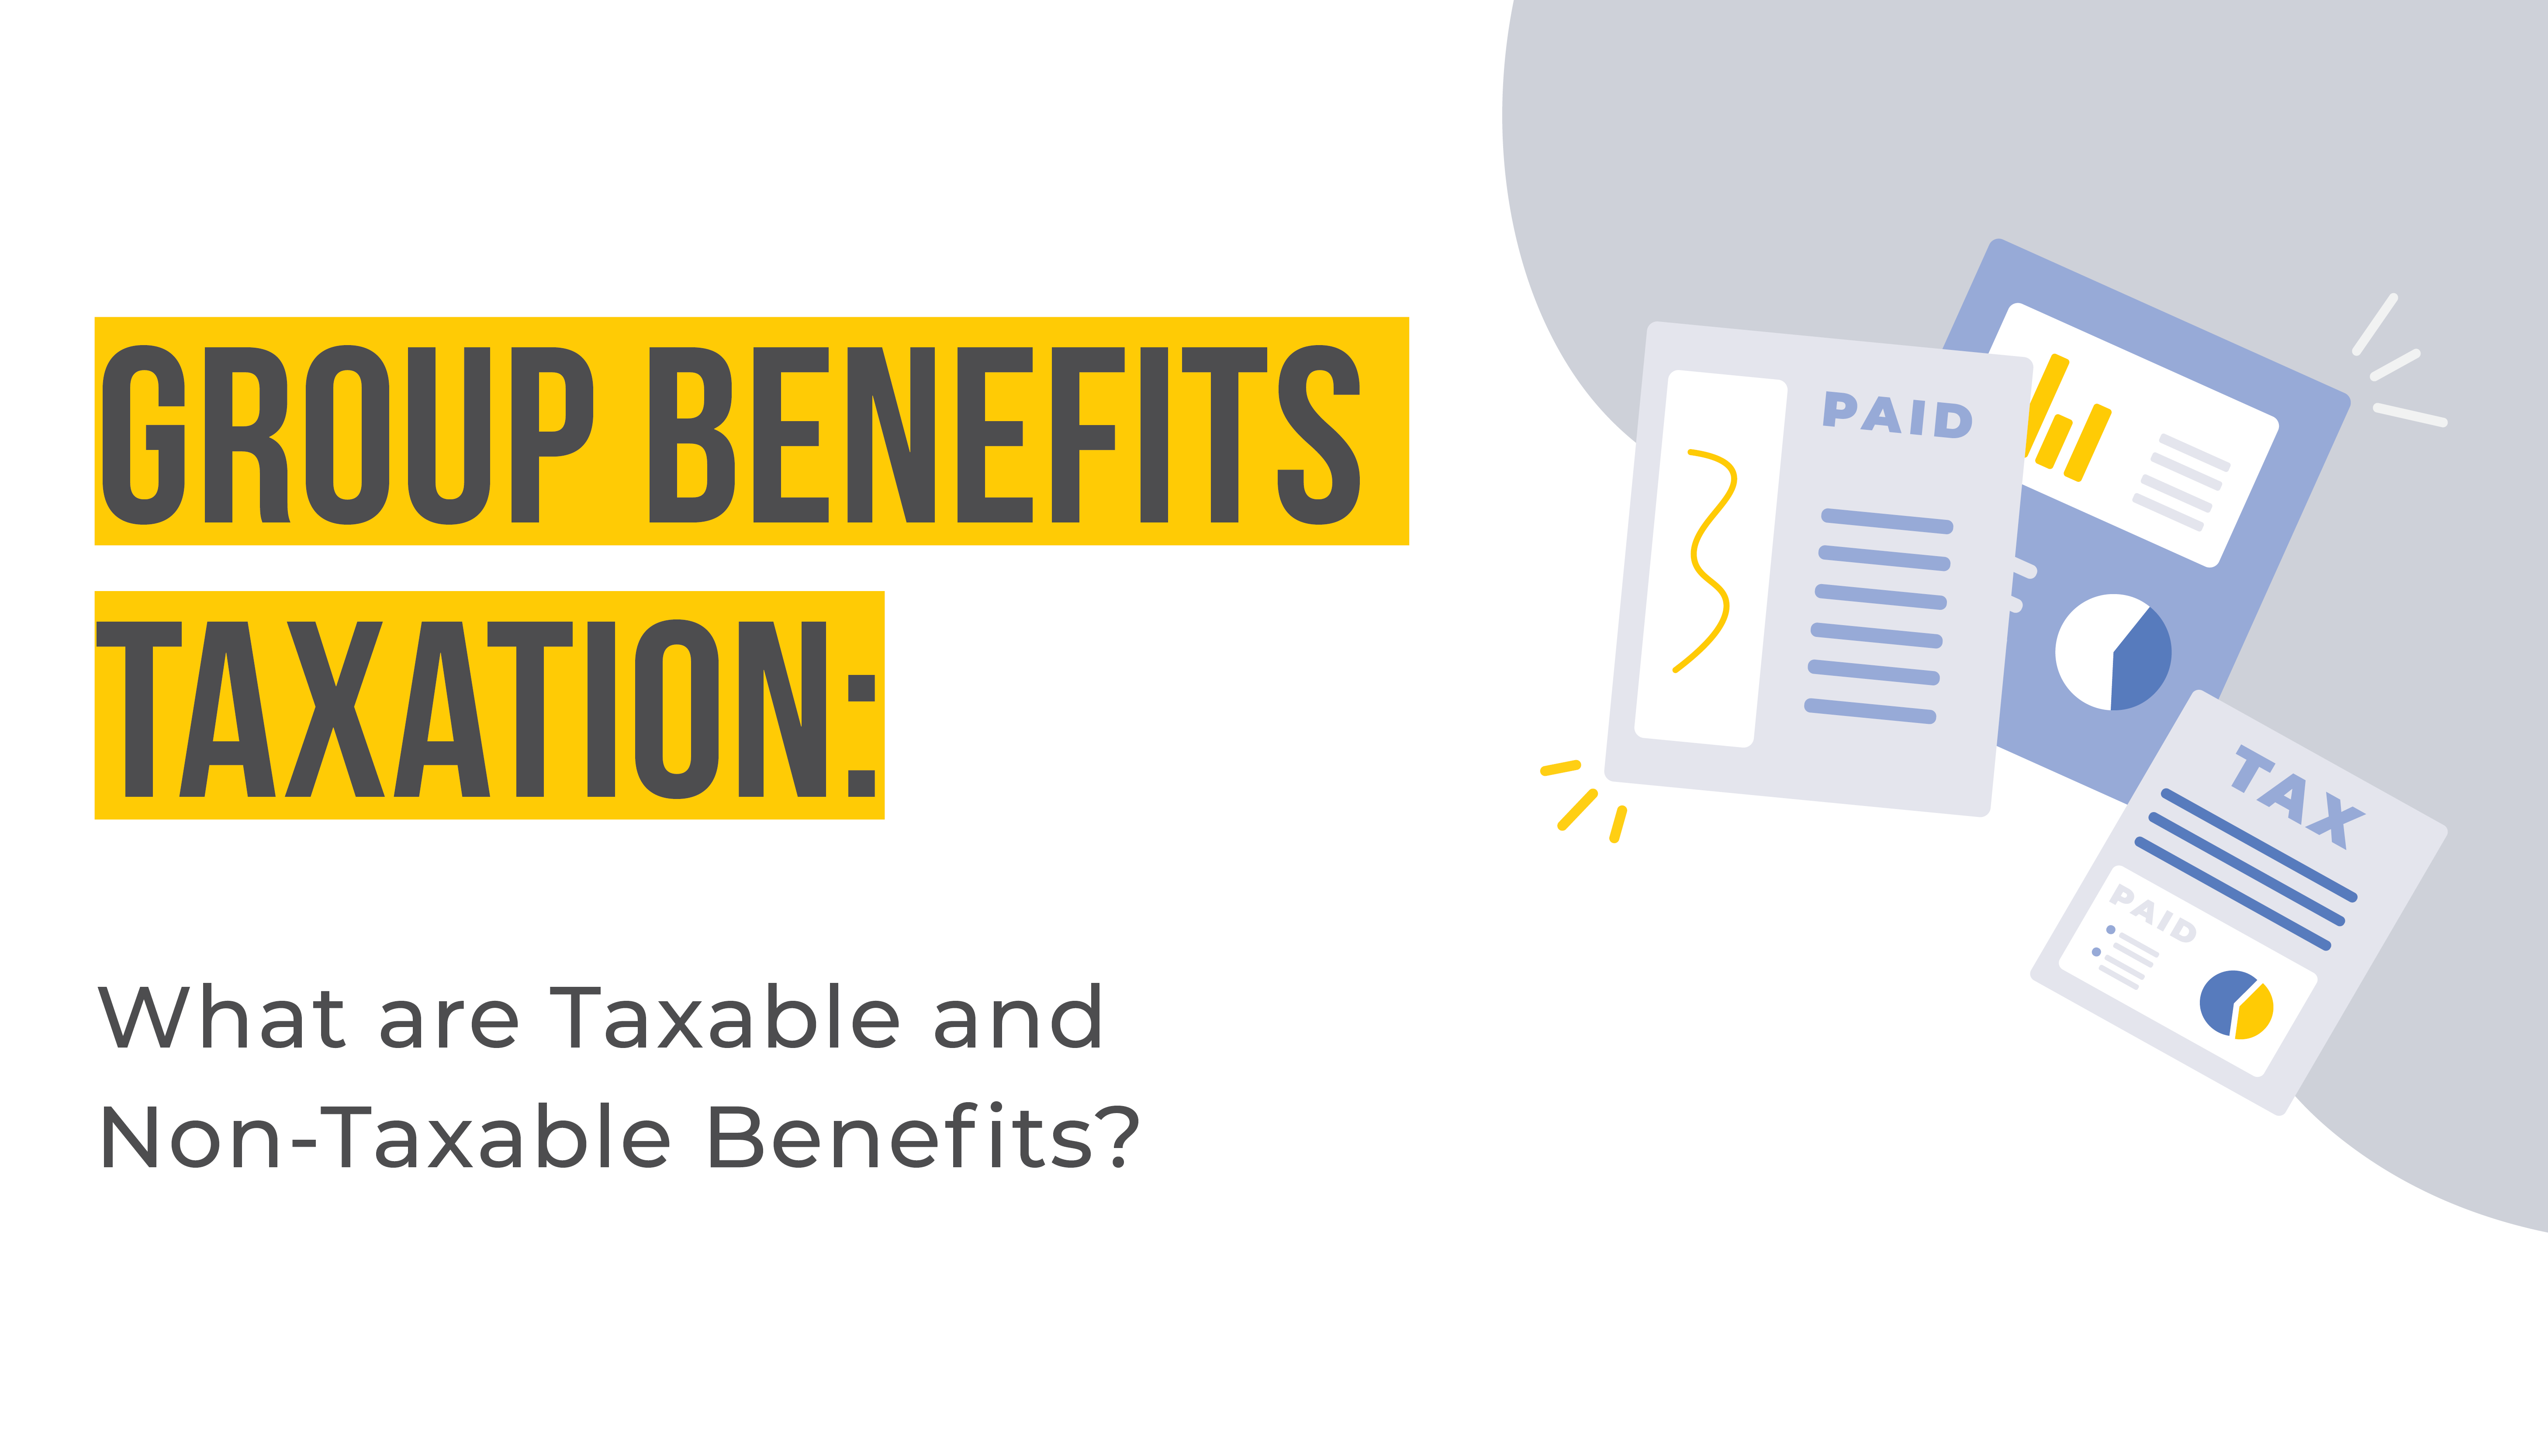 Group Benefits Taxation: What are Non-Taxable and Taxable Benefits? | Benefits by Design